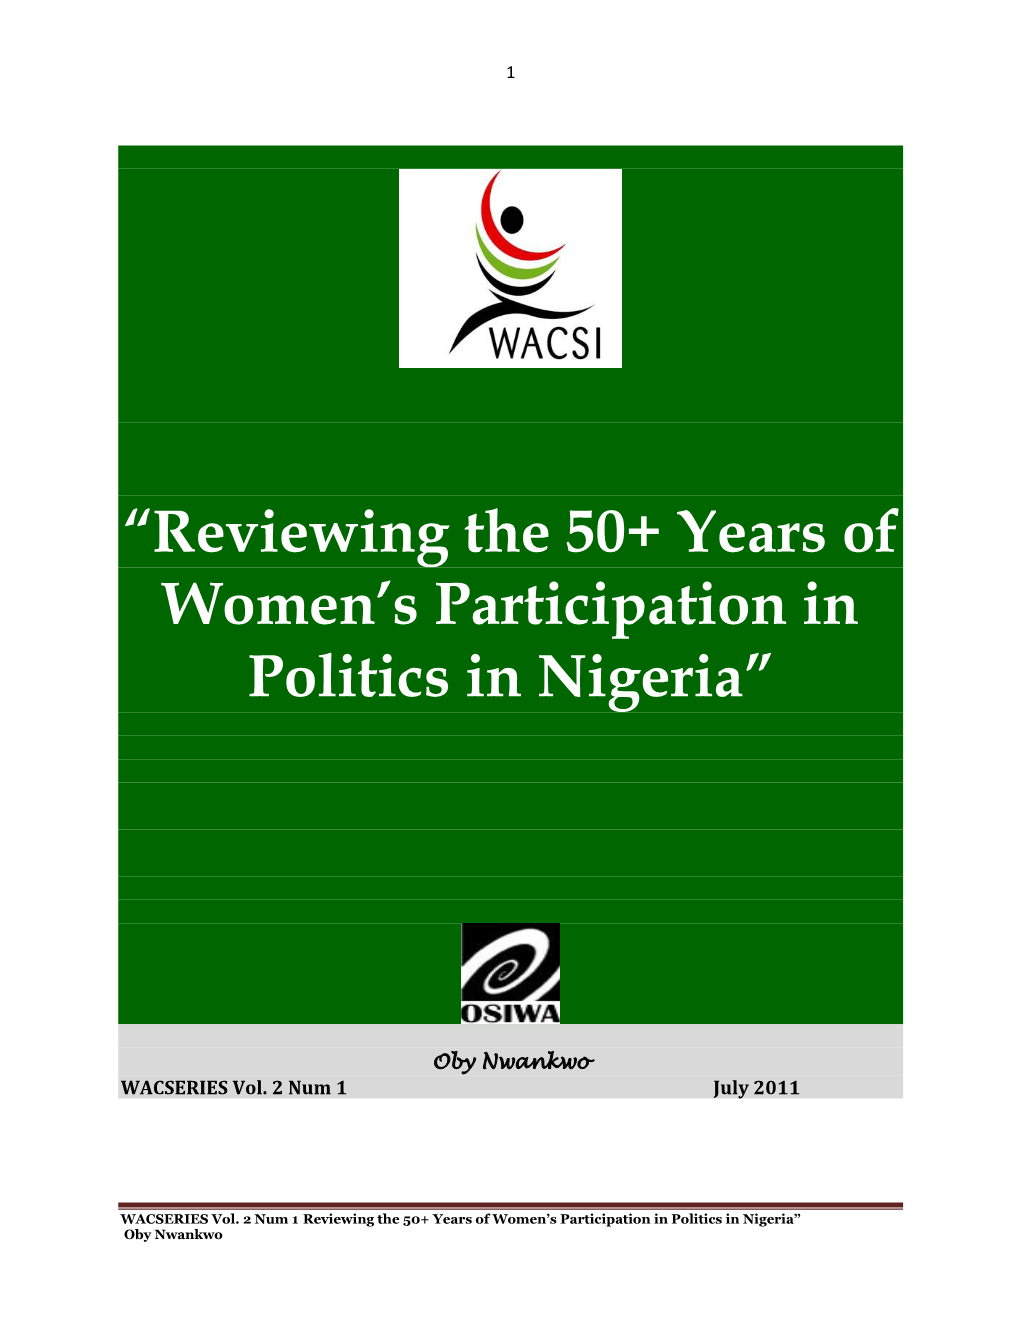 “Reviewing the 50+ Years of Women's Participation in Politics in Nigeria”